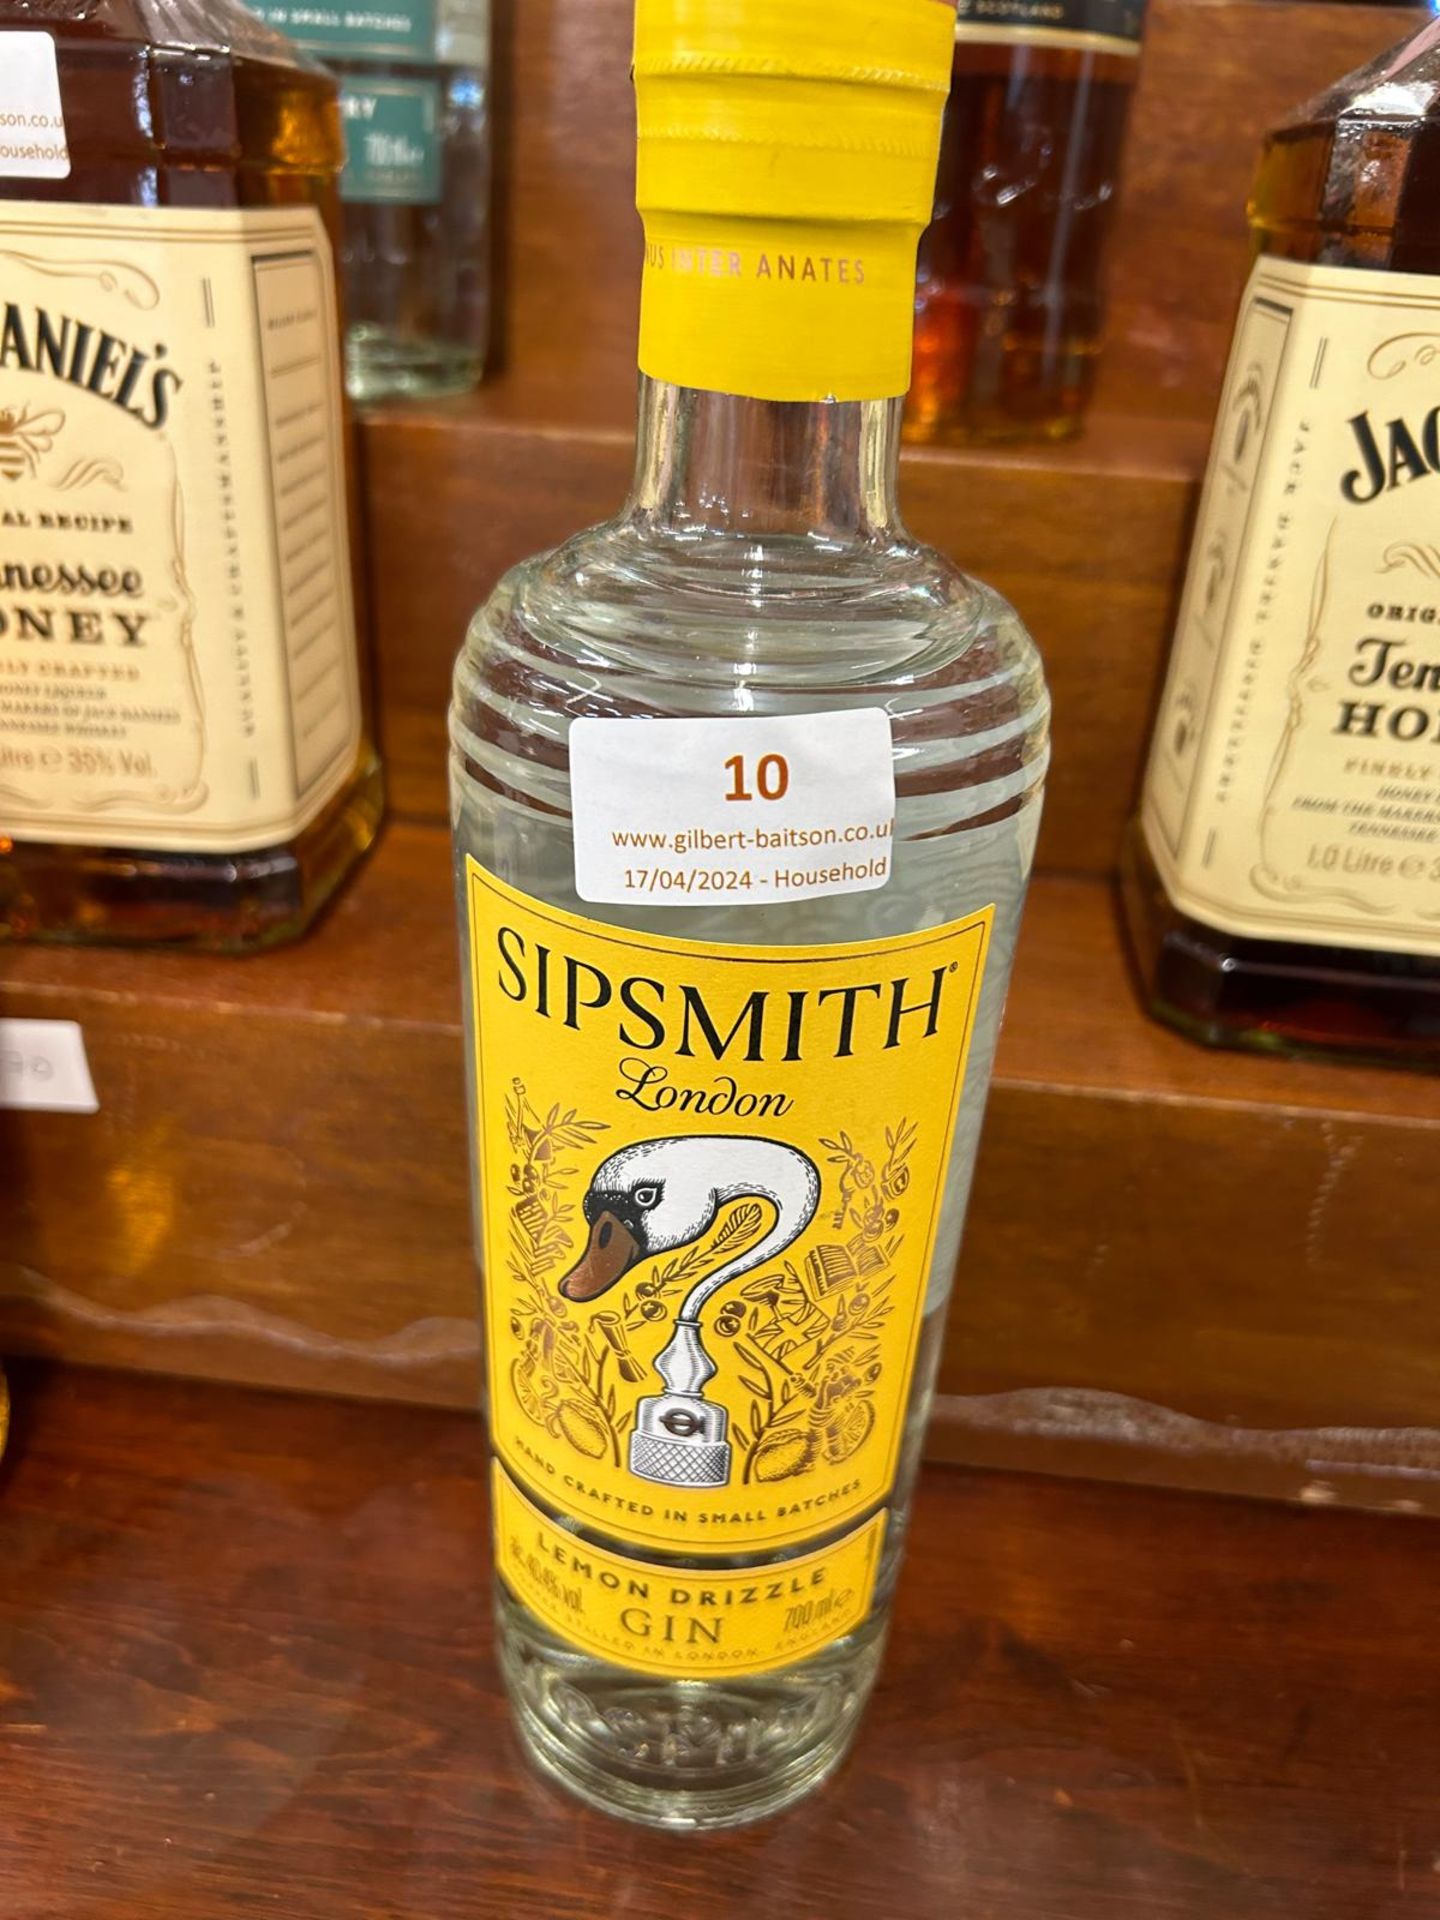 Sipsmith Lemon Drizzle Gin 70cl